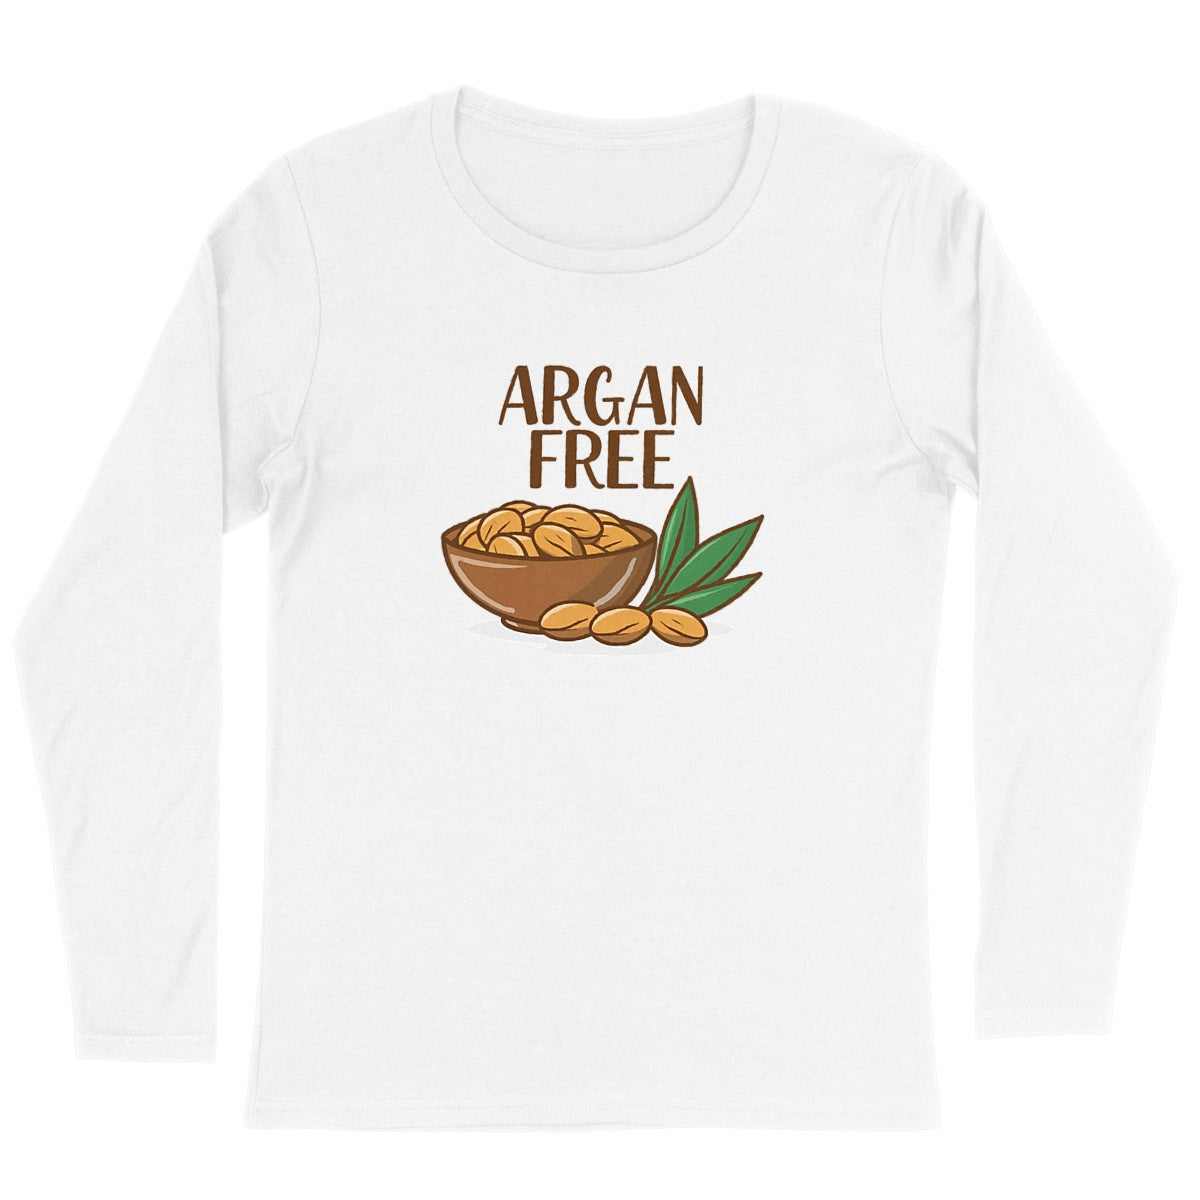 Argan Butter Free Long Sleeve Organic Cotton Graphic Shirt | Hypoallergenic - Allergy Friendly - Naturally Free